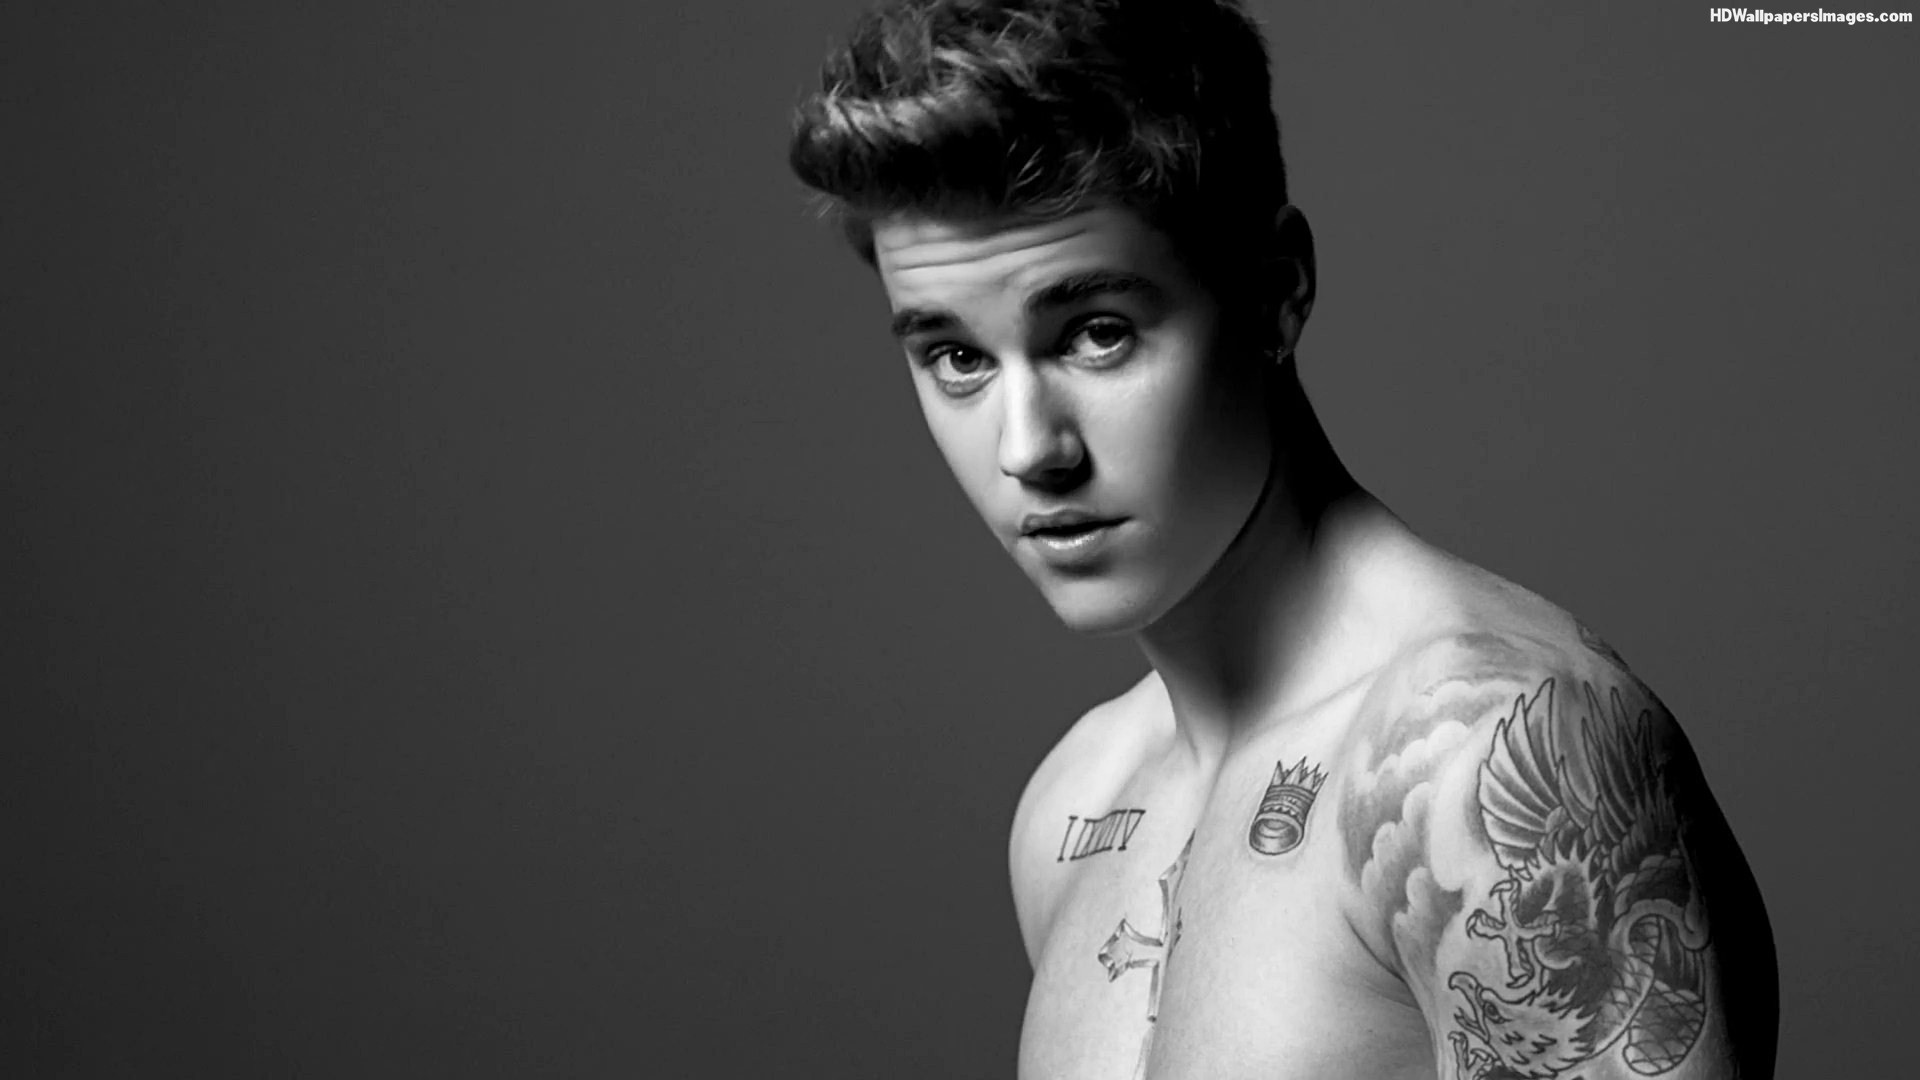 Justin Bieber Wallpaper Top Collections Of Pictures Image